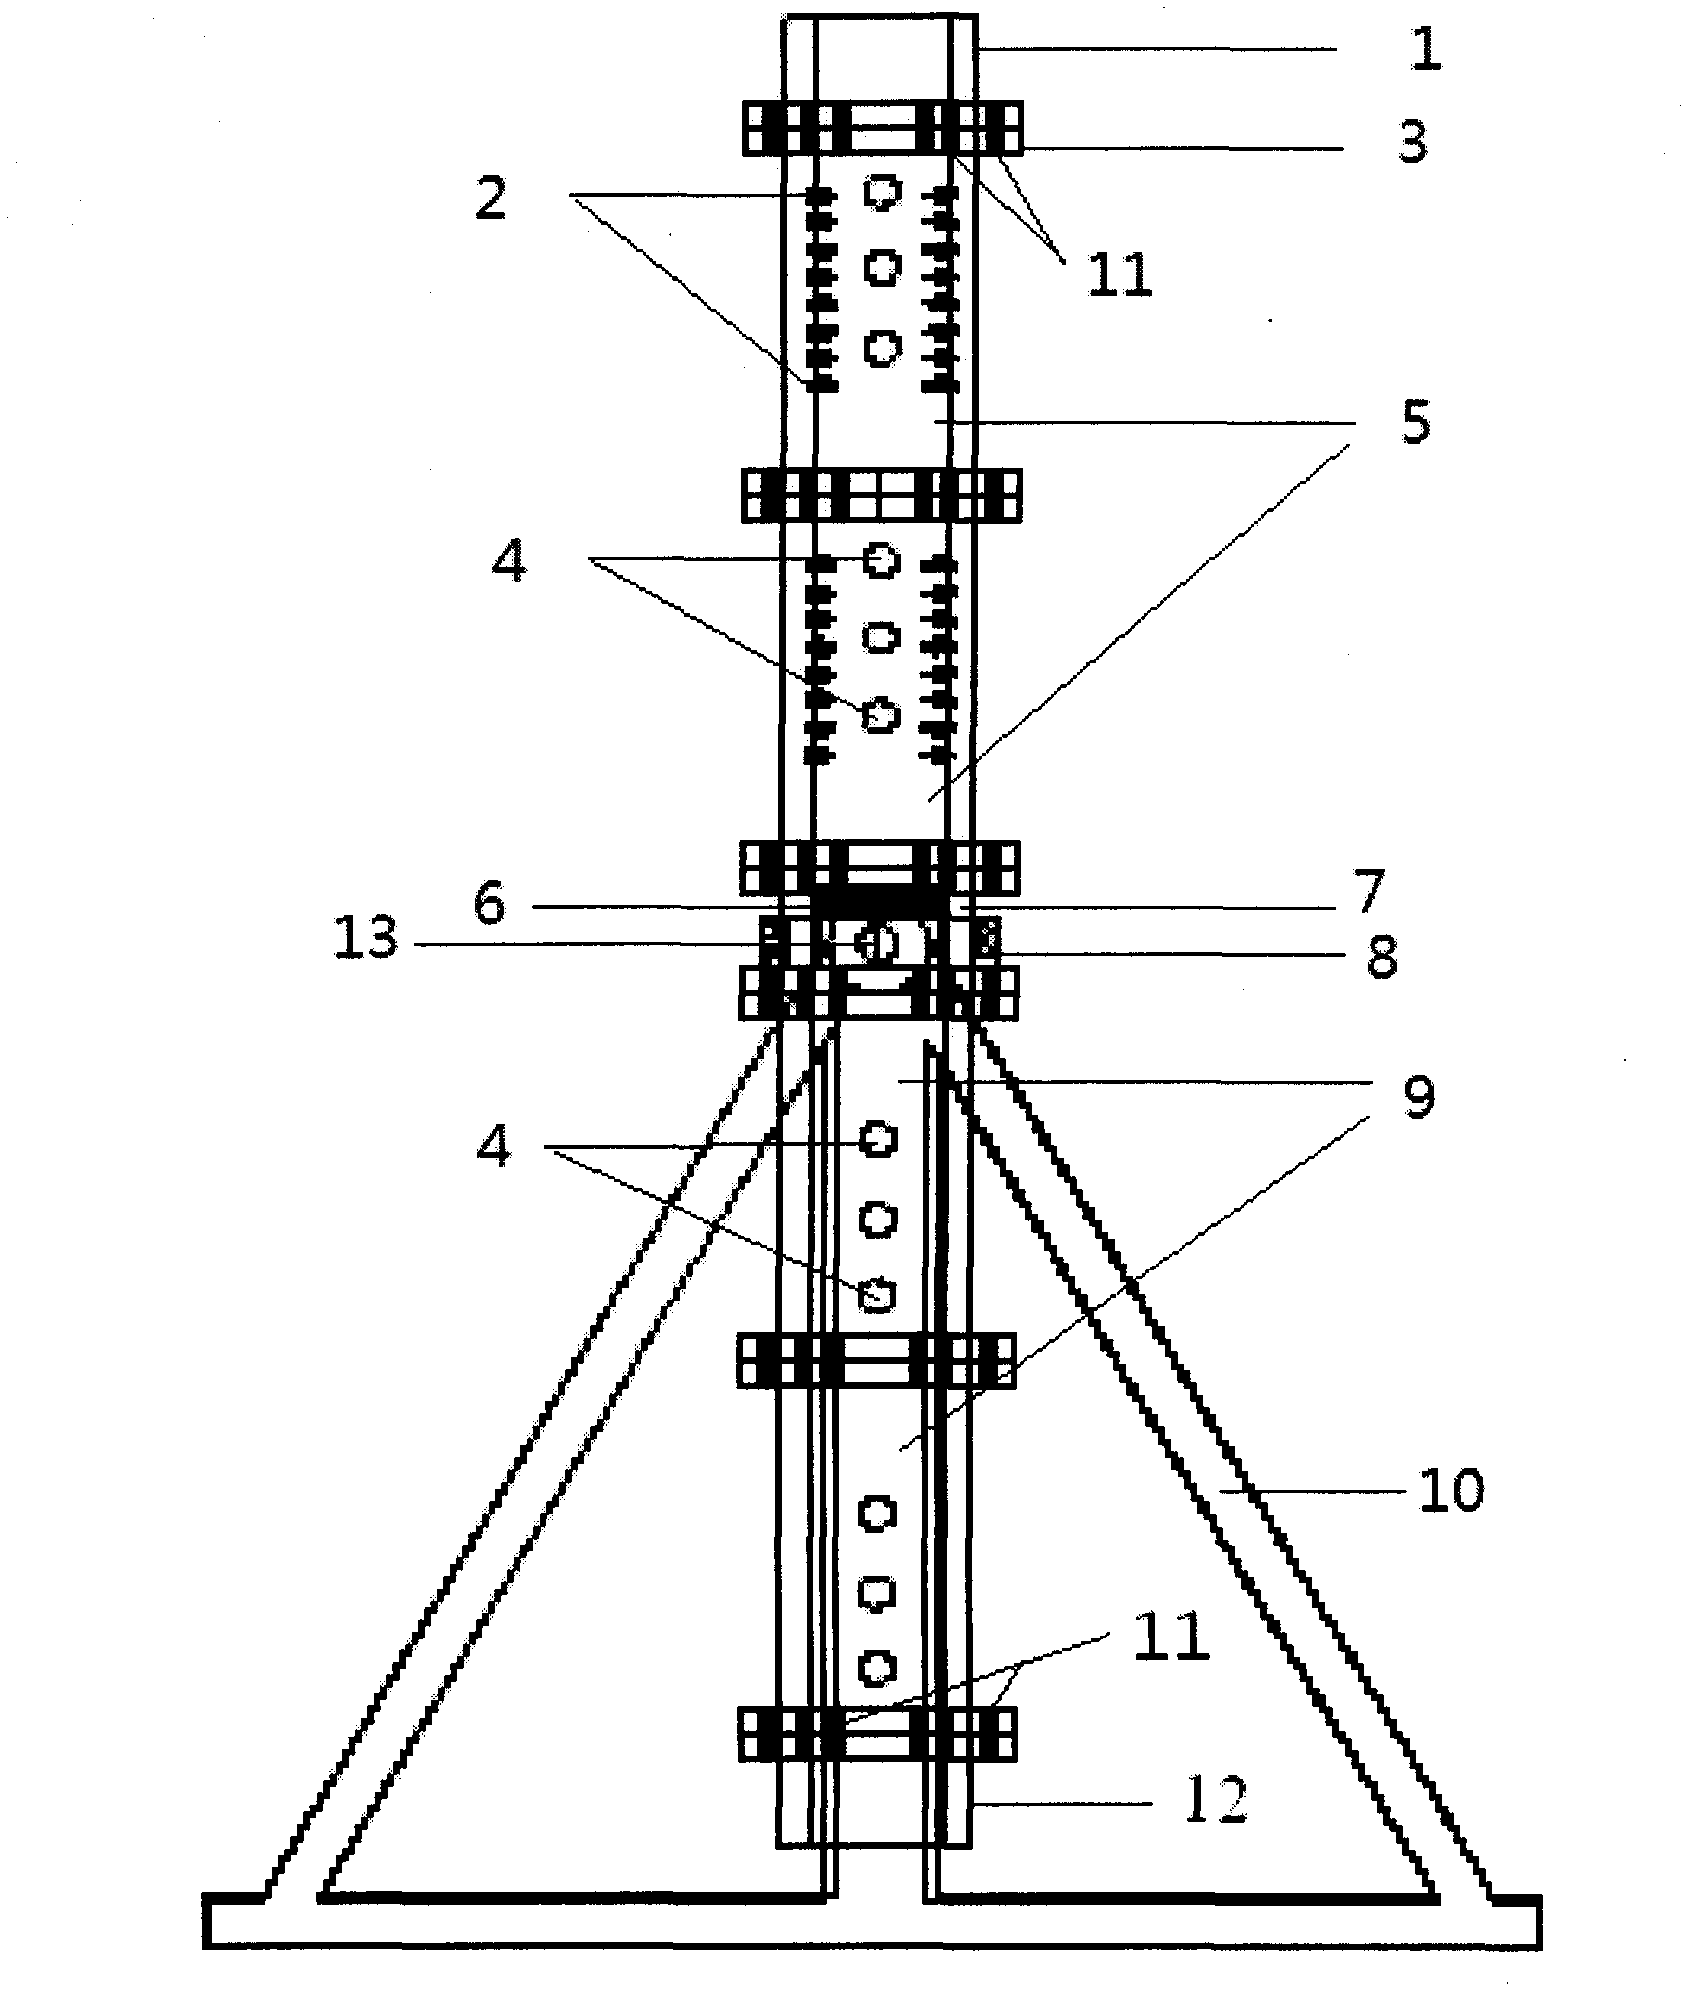 Physical simulation device for seepage of mine water